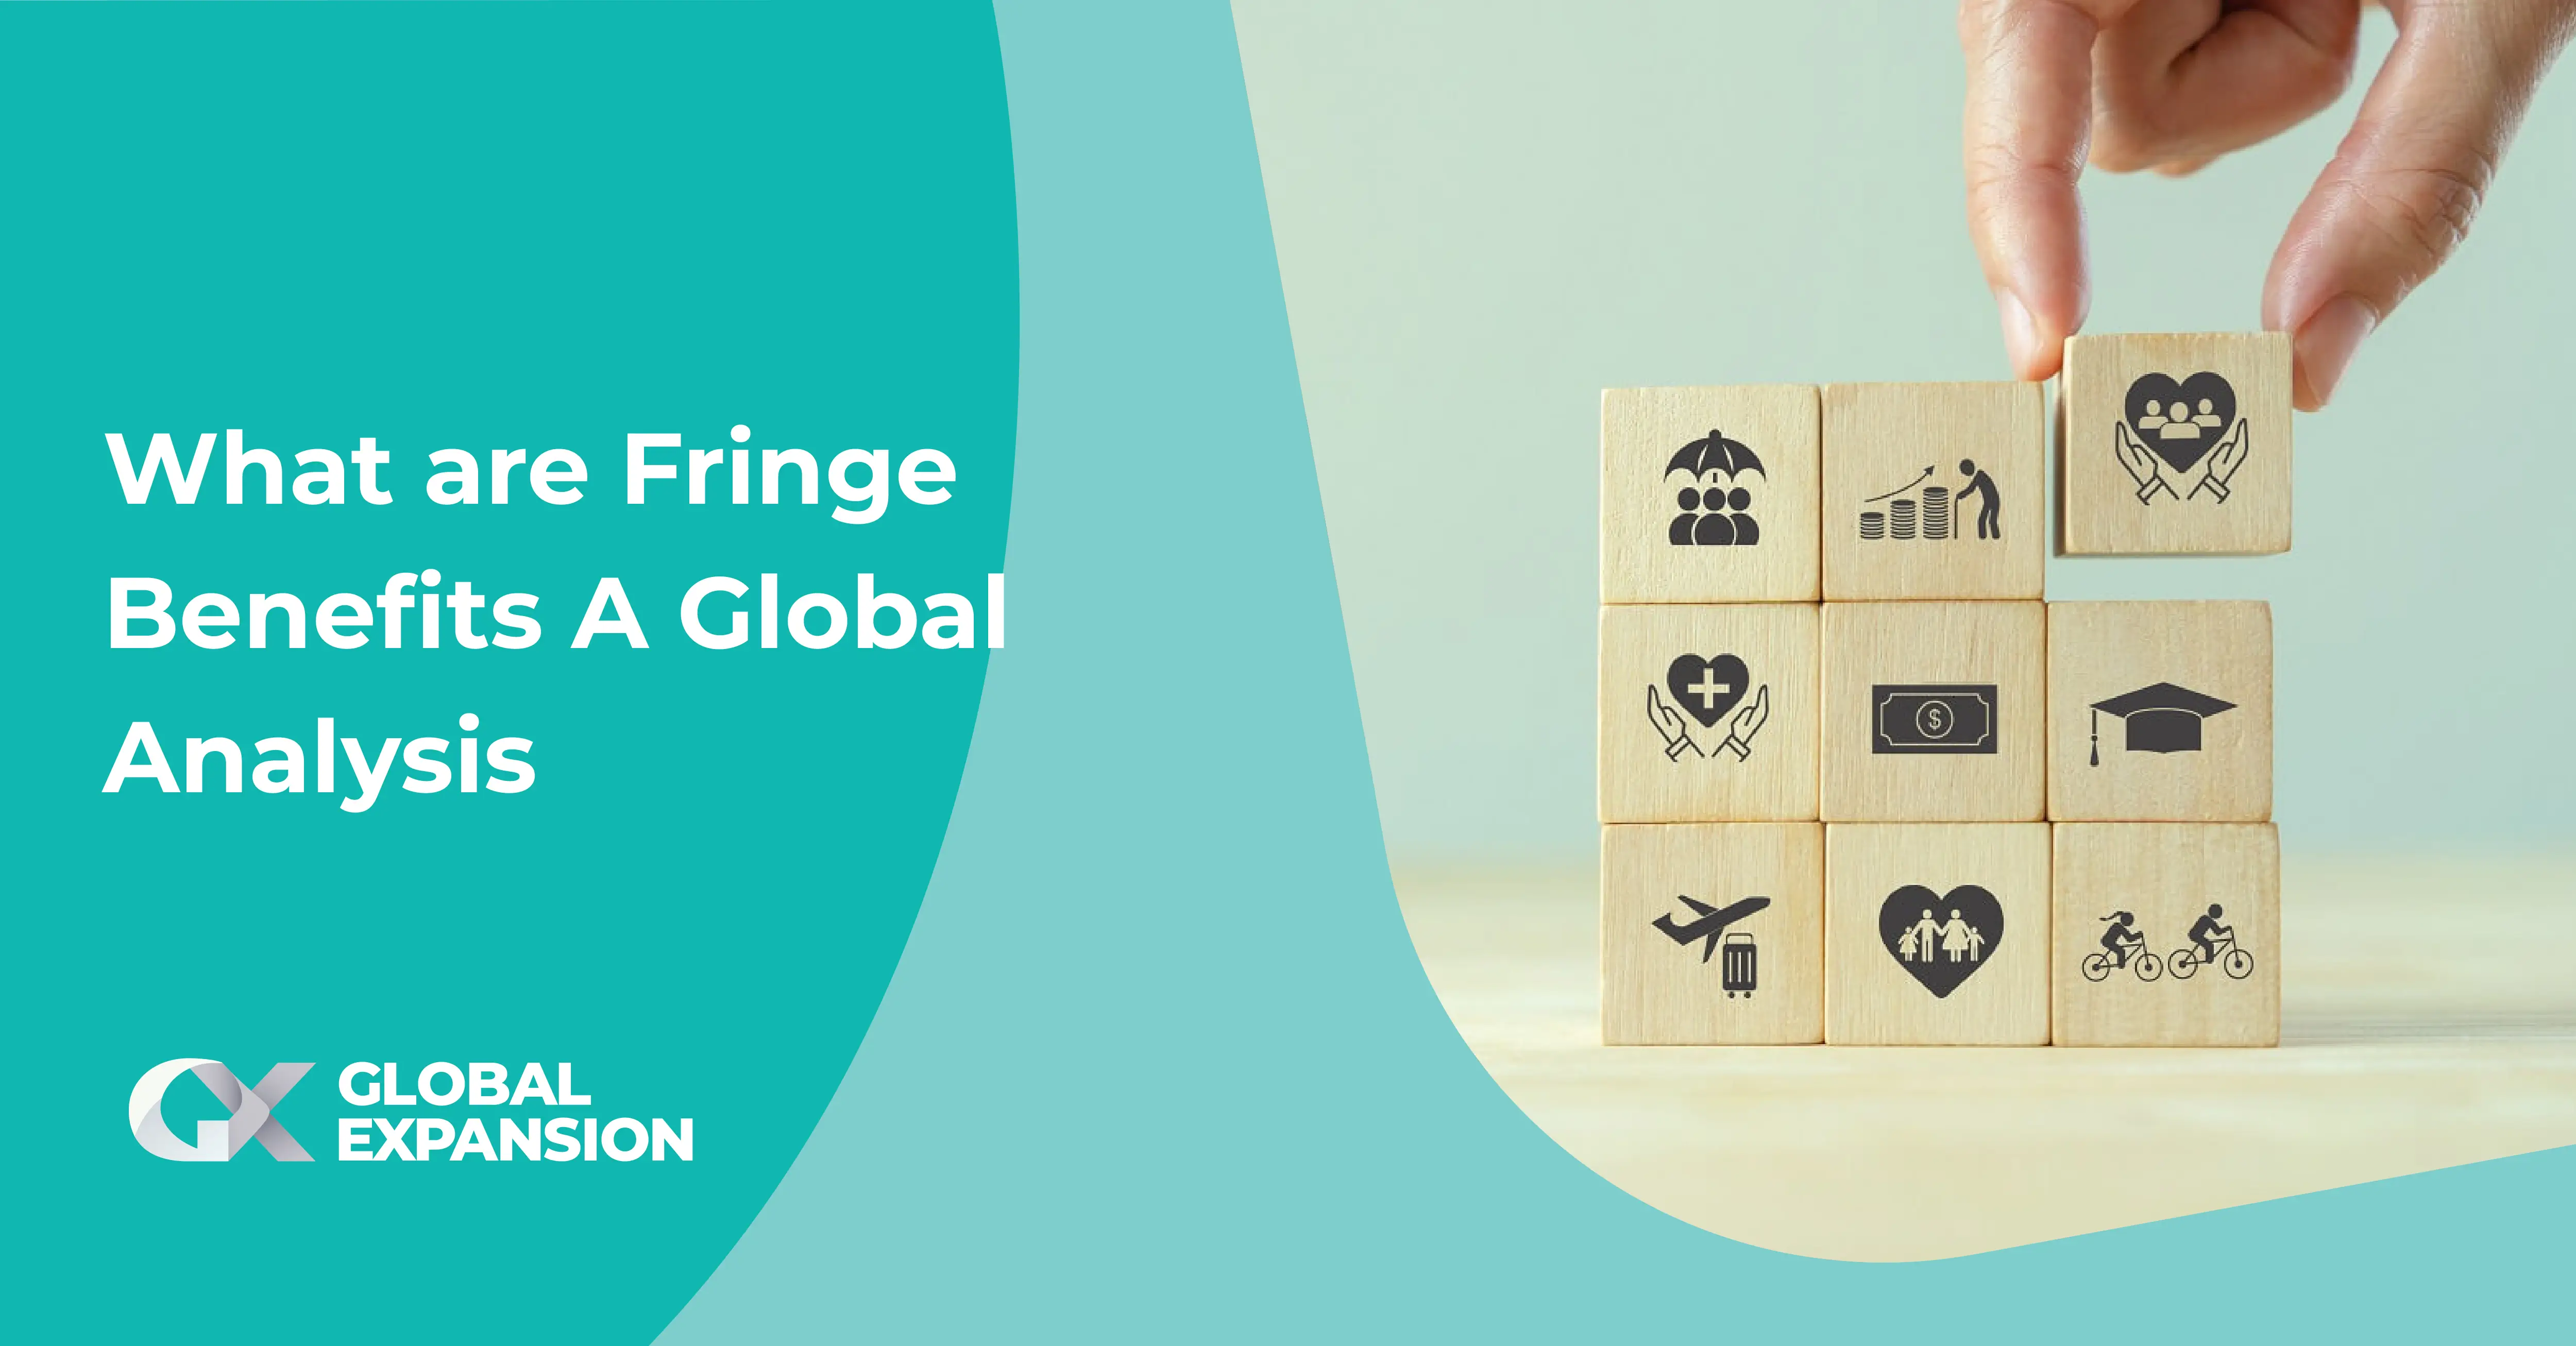 What are Fringe Benefits A Global Analysis